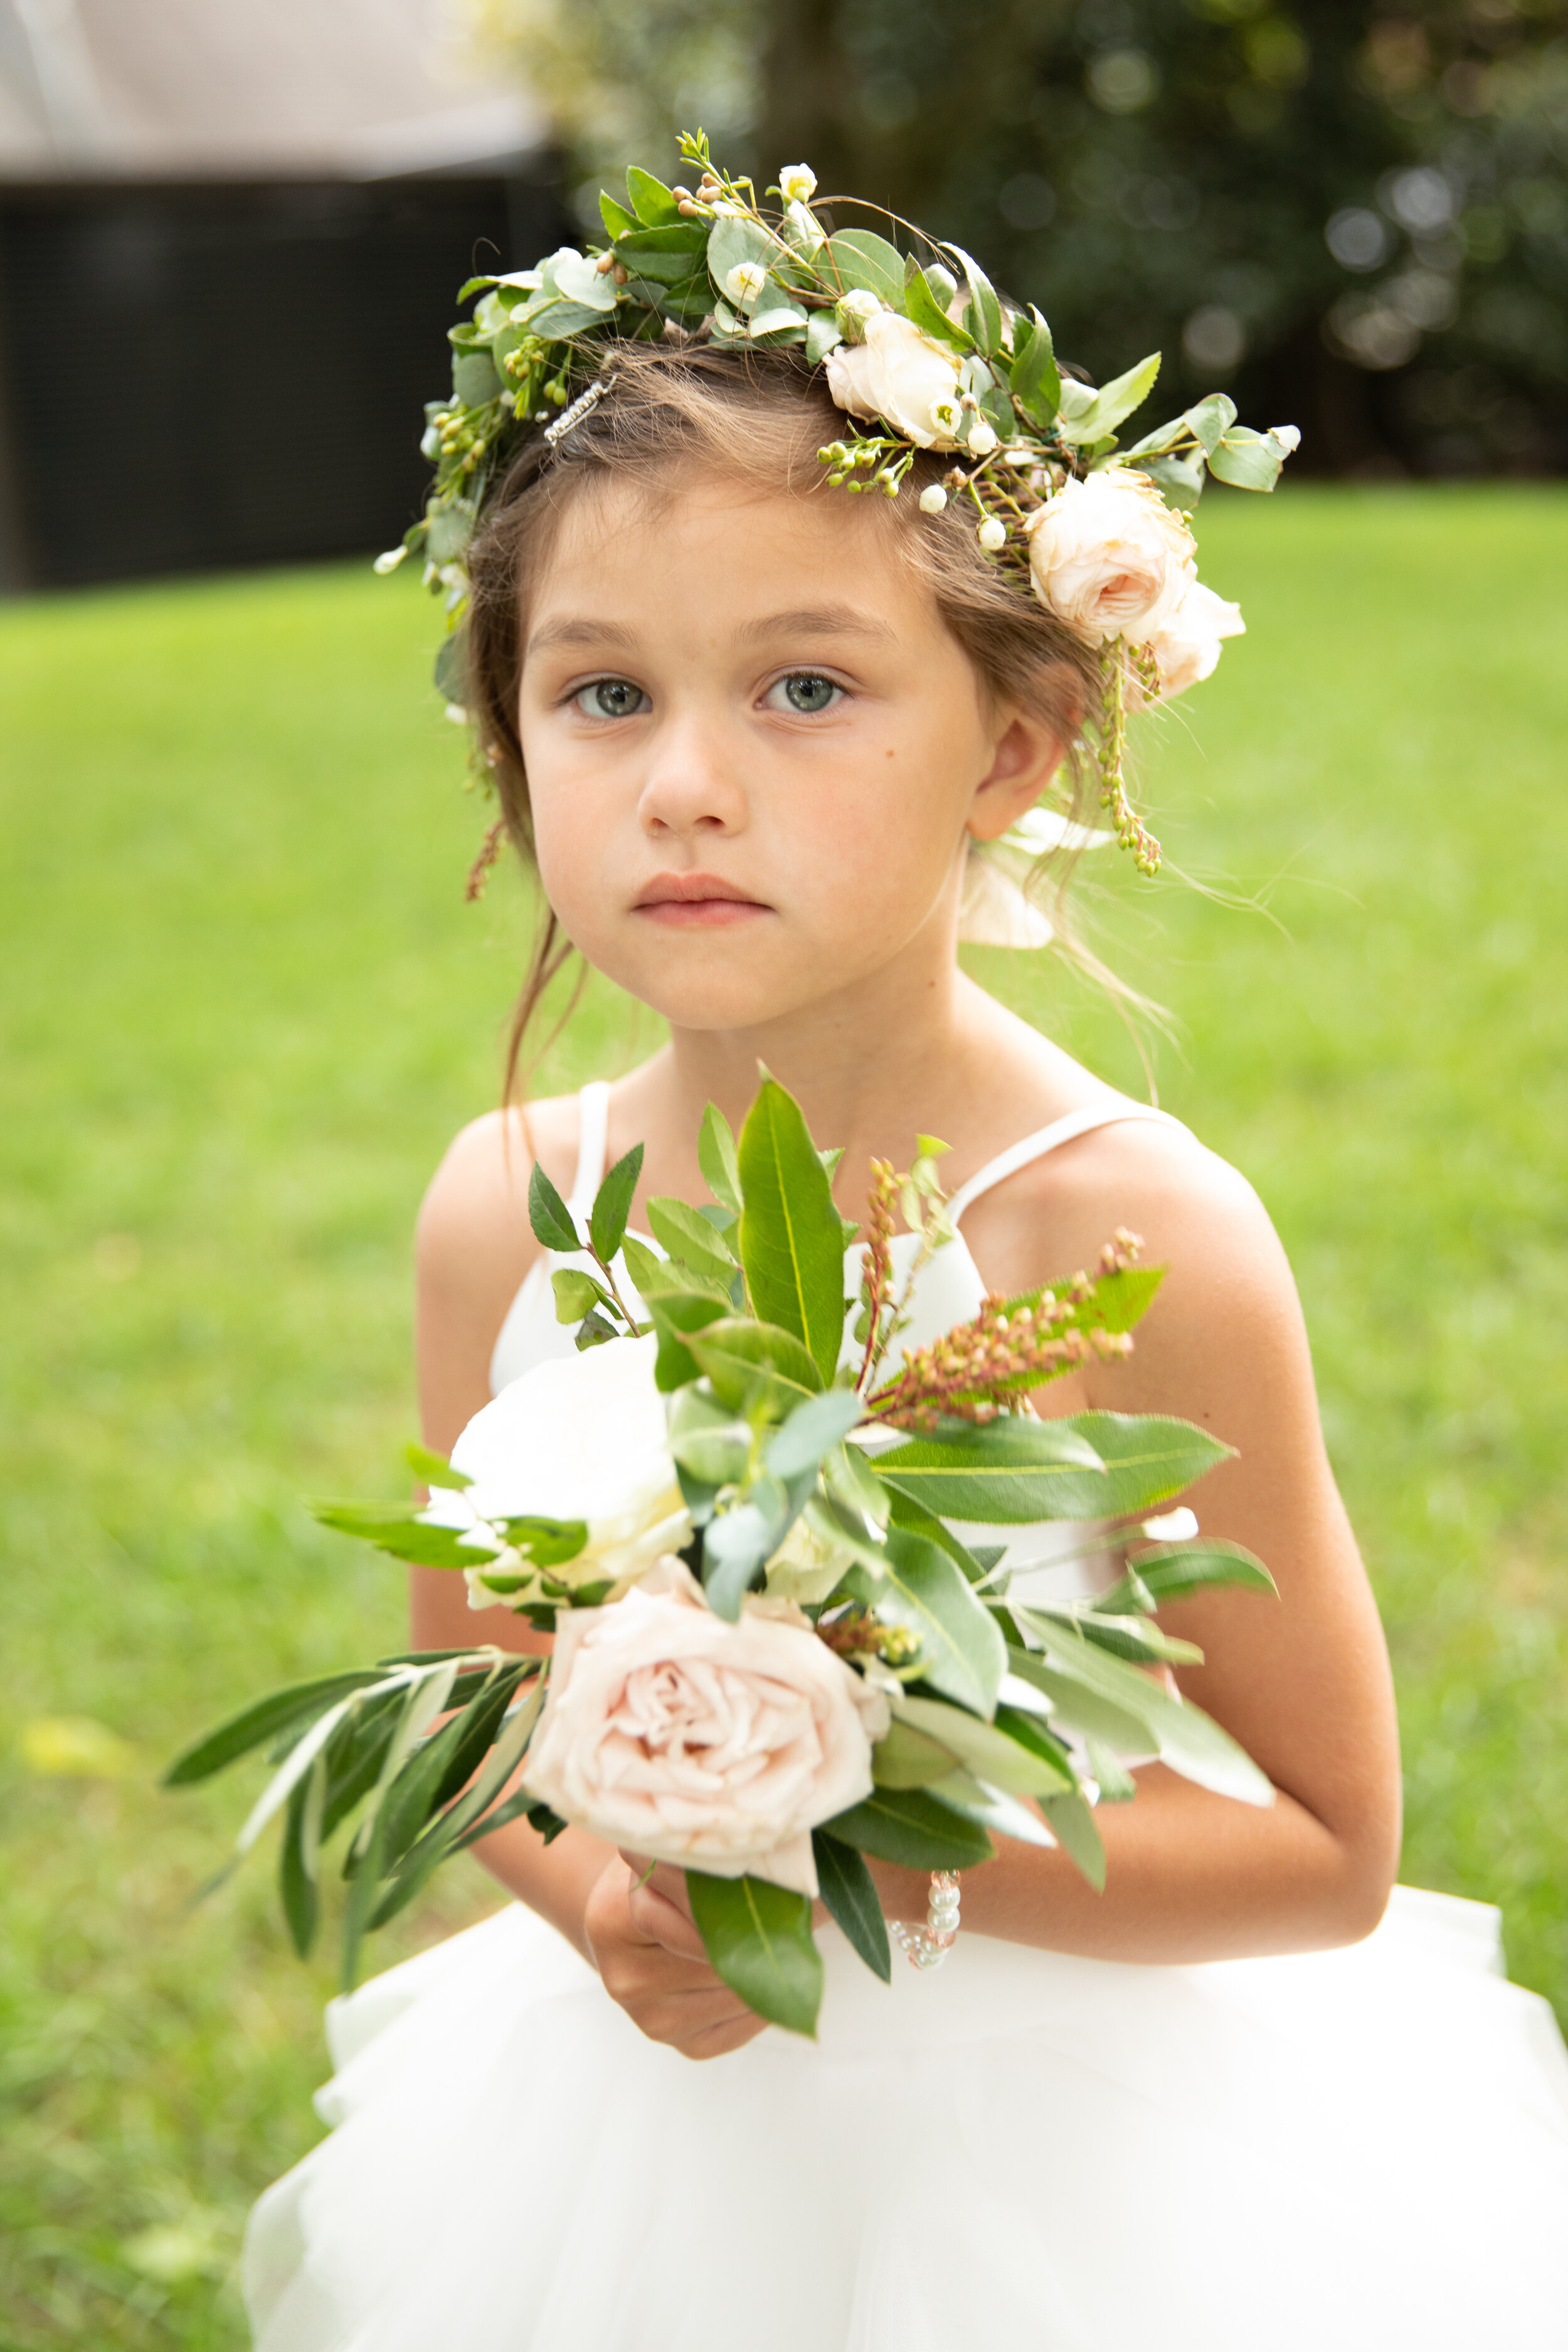 Dainty flower crown for the flower girl and a peony nosegay. Nashville wedding florist at Christ Church Cathedral.